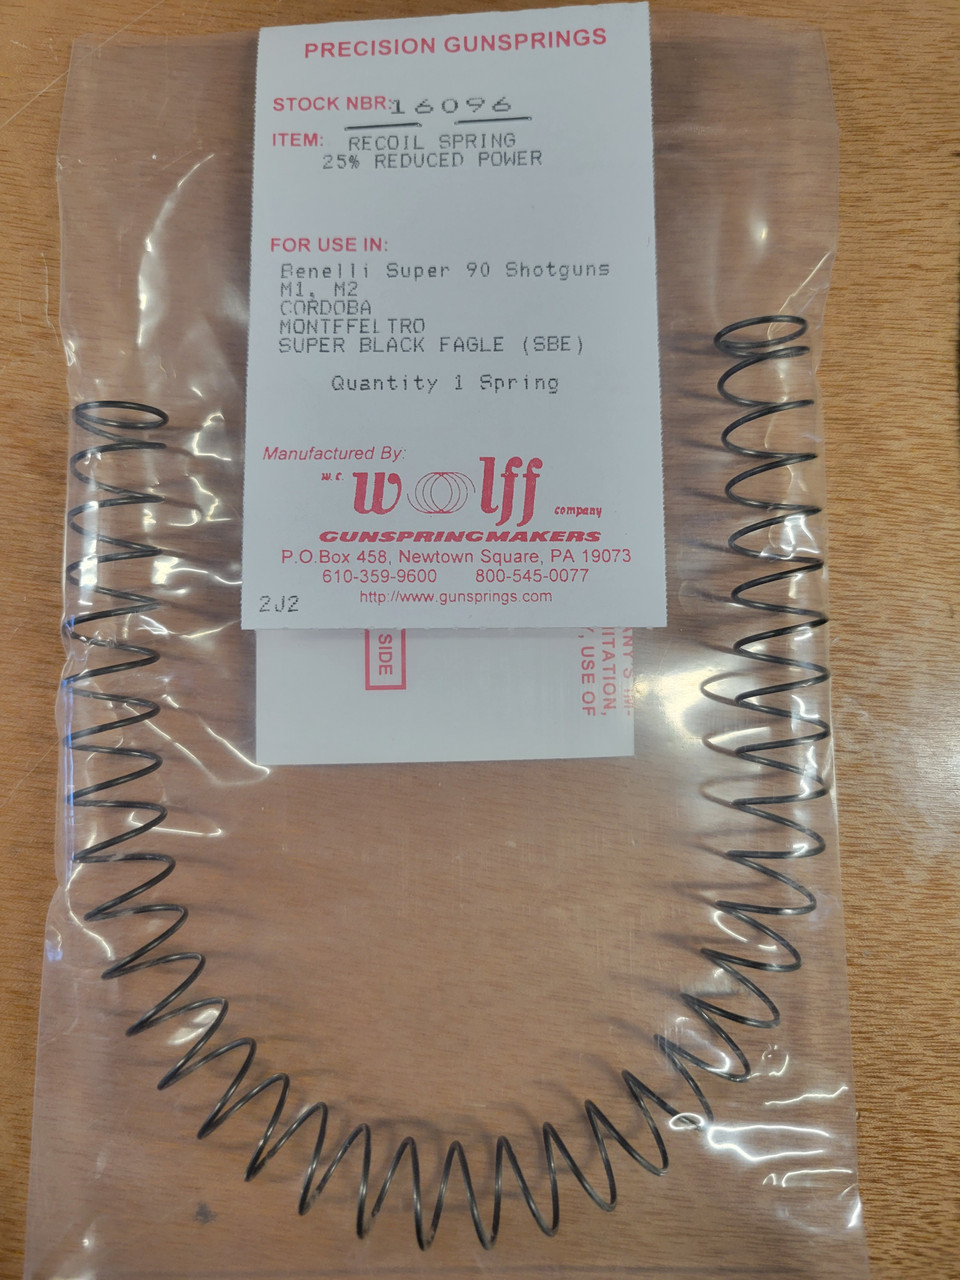 Wolff Reduced Power Recoil Springs for Benelli Super 90 Series Shotguns, 12 & 20 Gauge